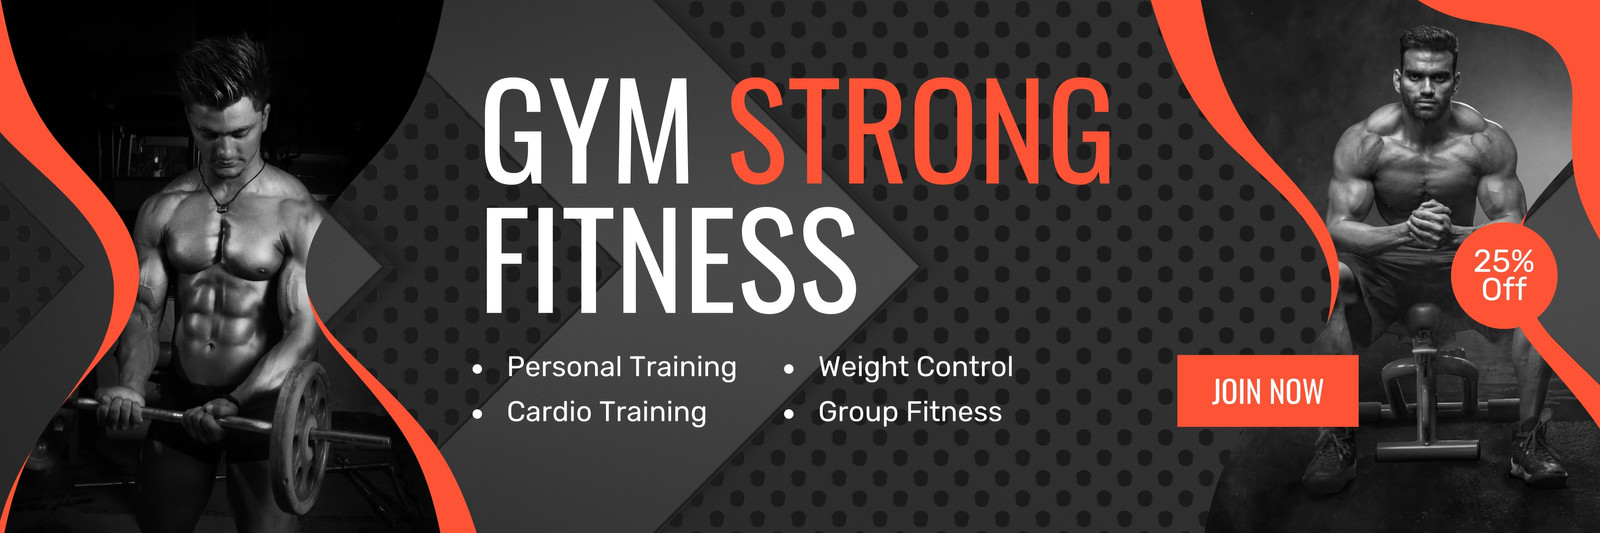 Page 9 - Free and customizable gym templates